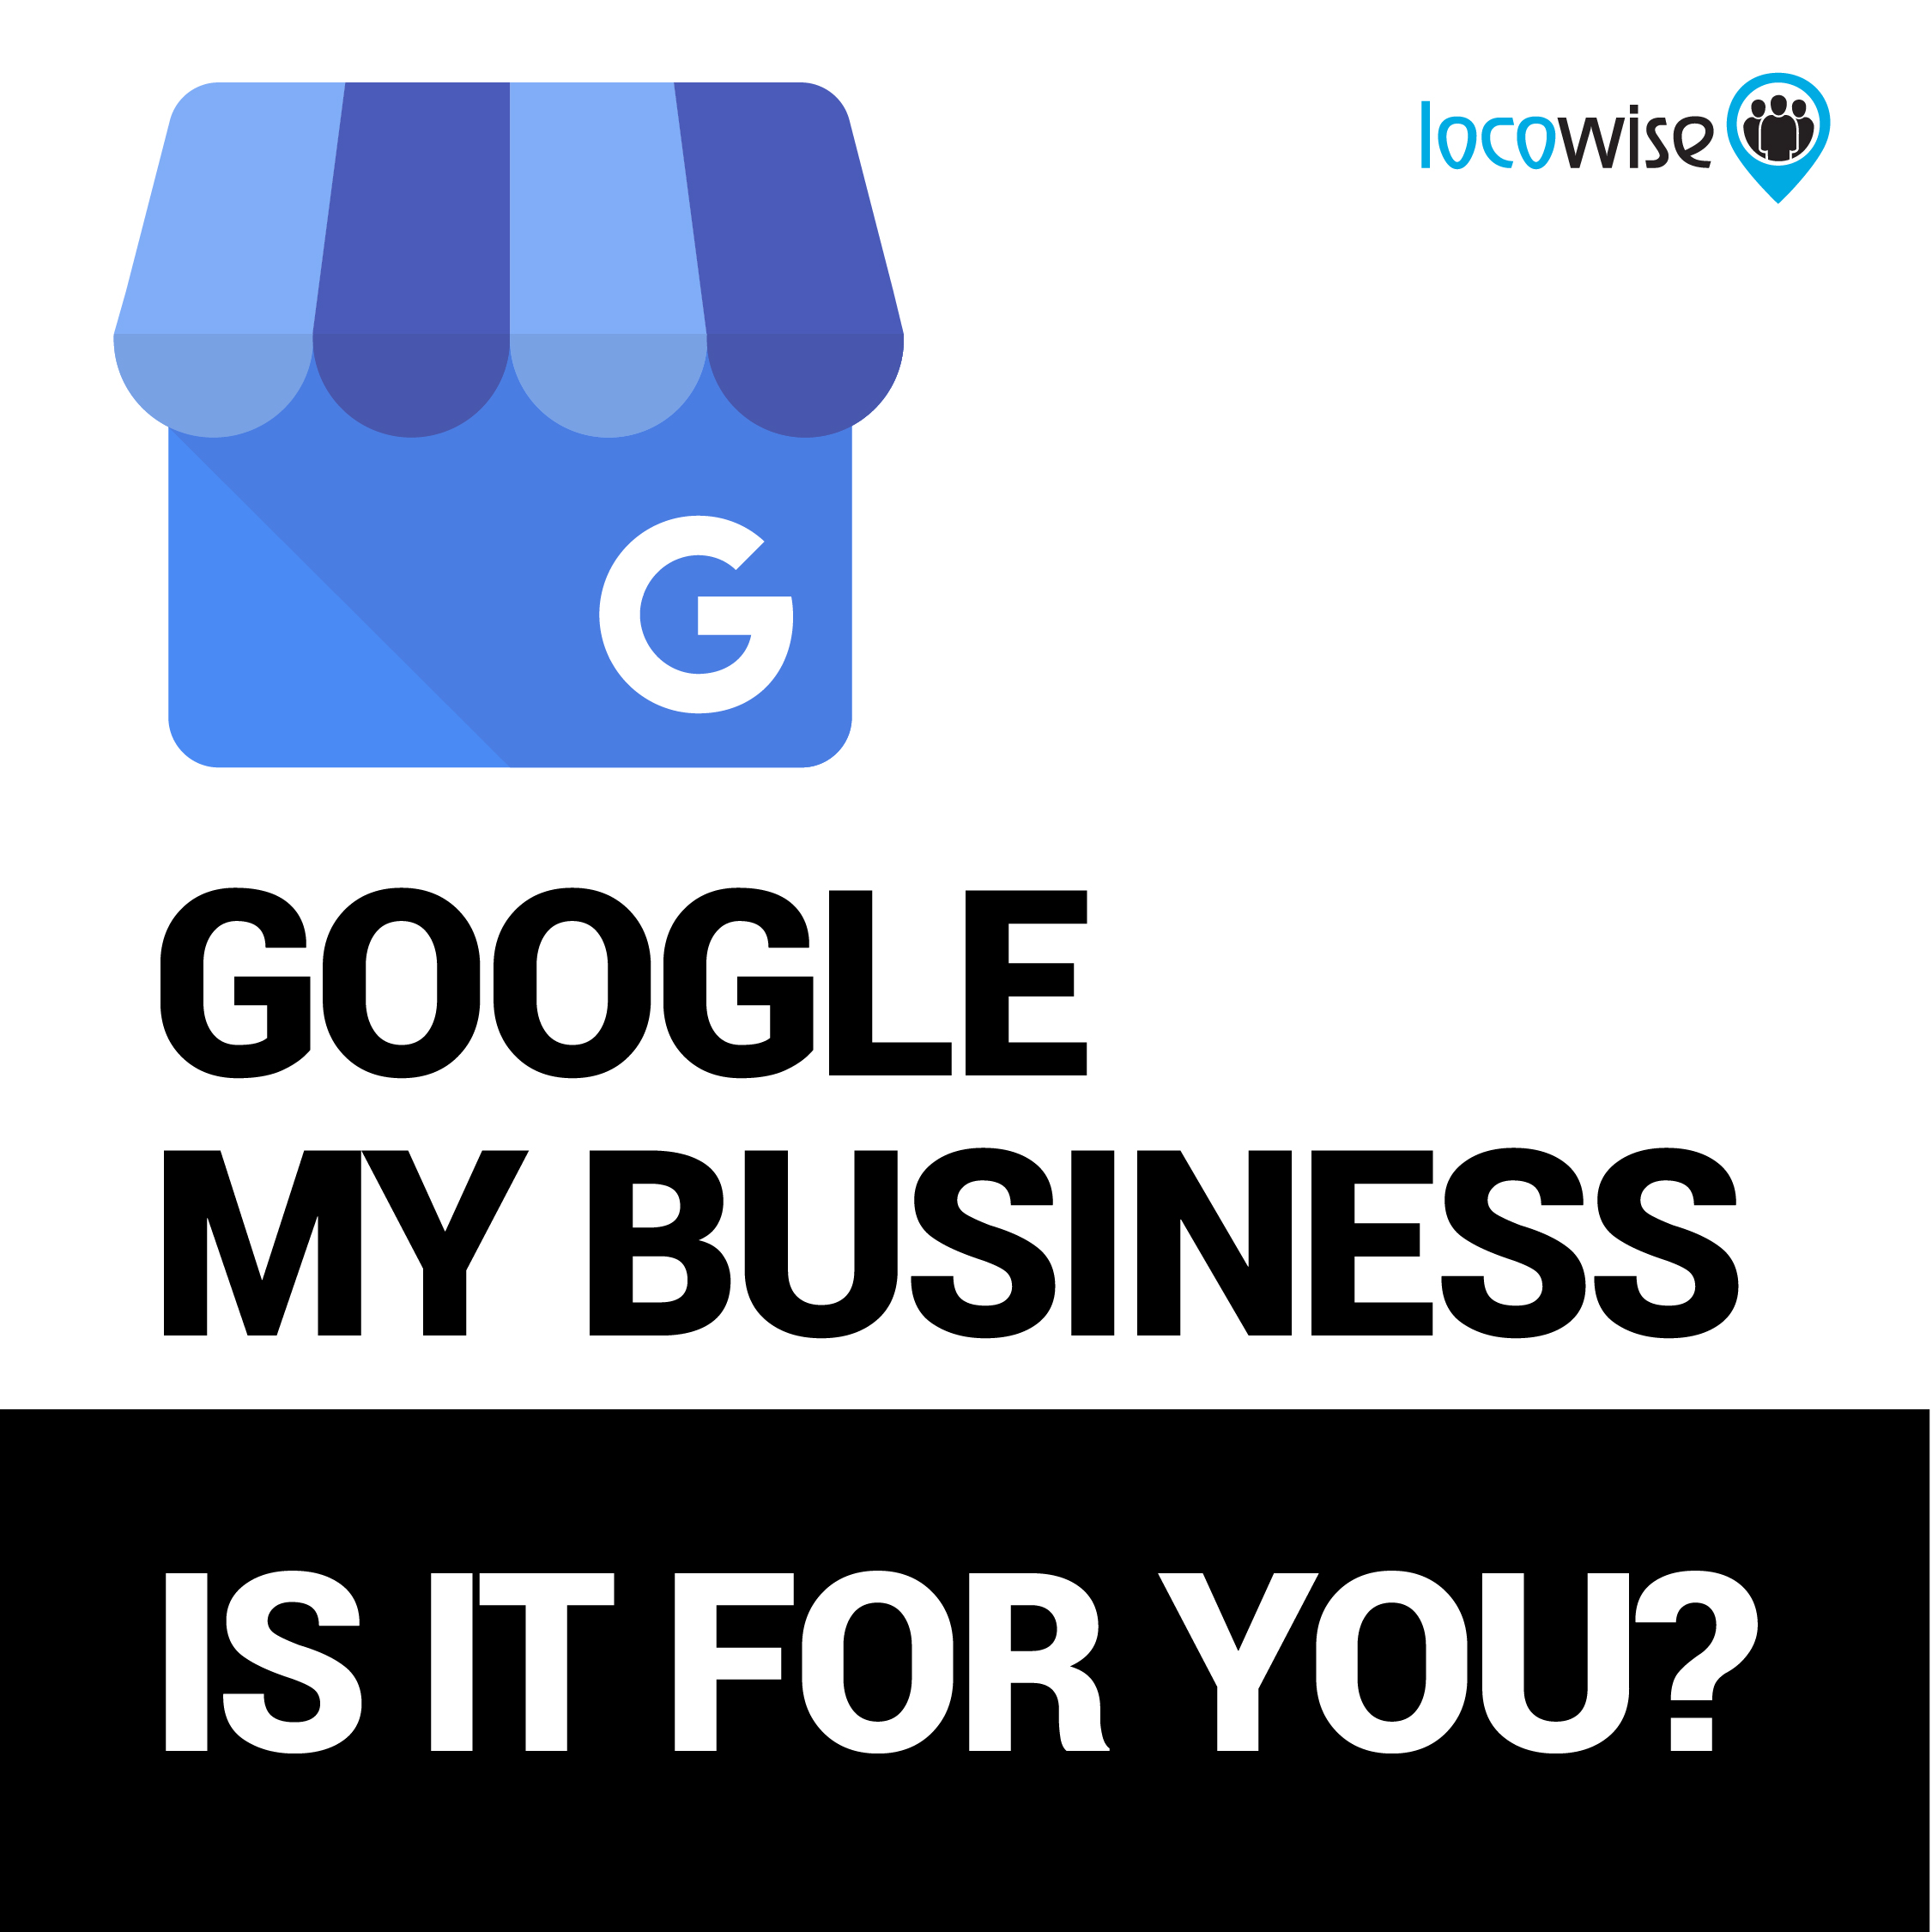 Google My Business Listing | Google My Business Services